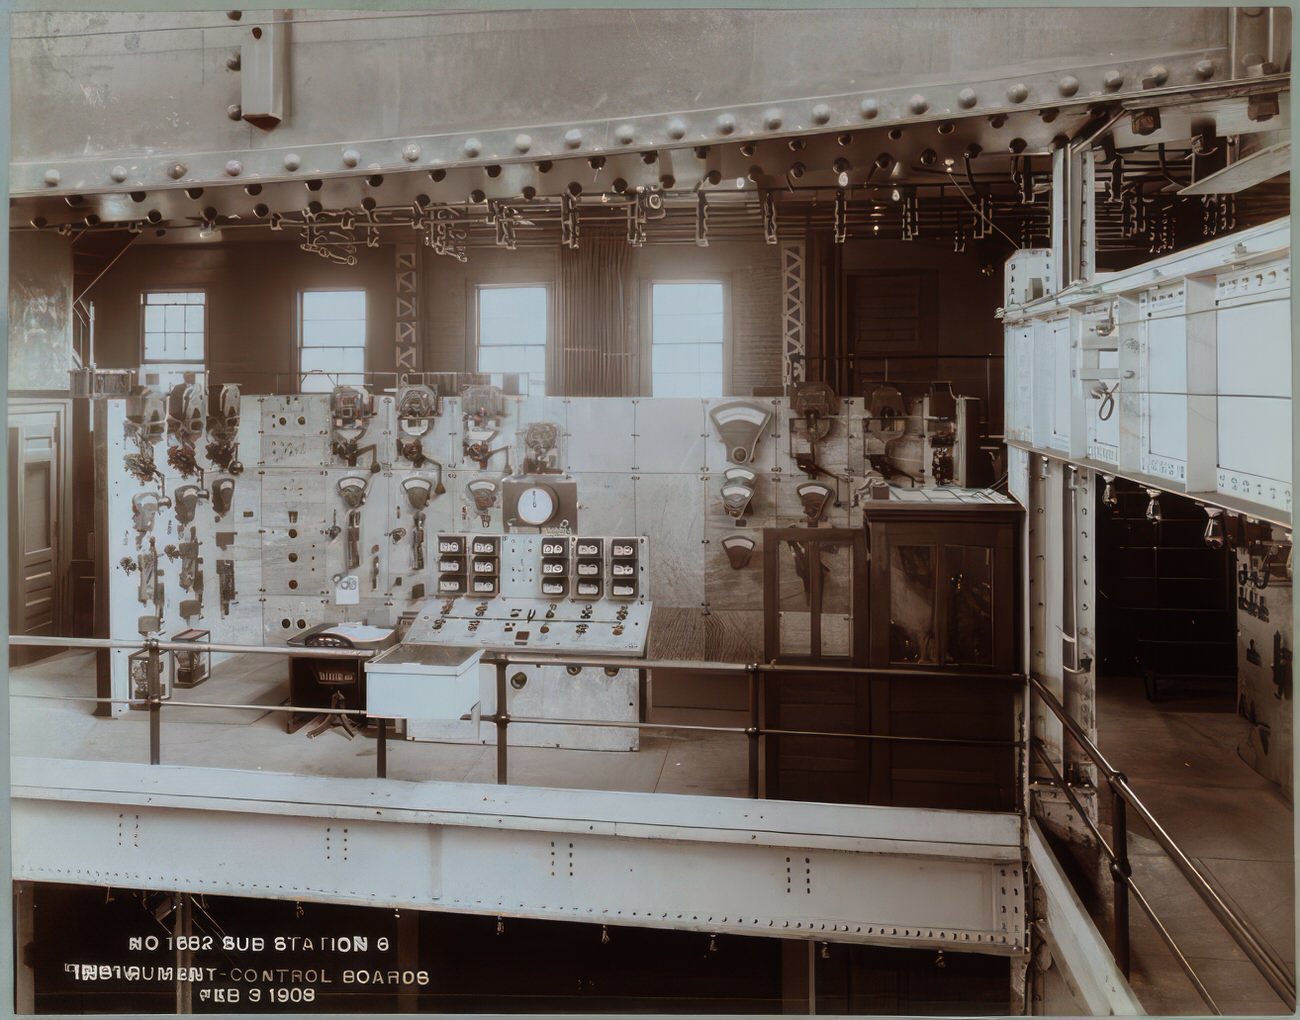 Sub Station 8 Instrument-Control Boards, 1903.